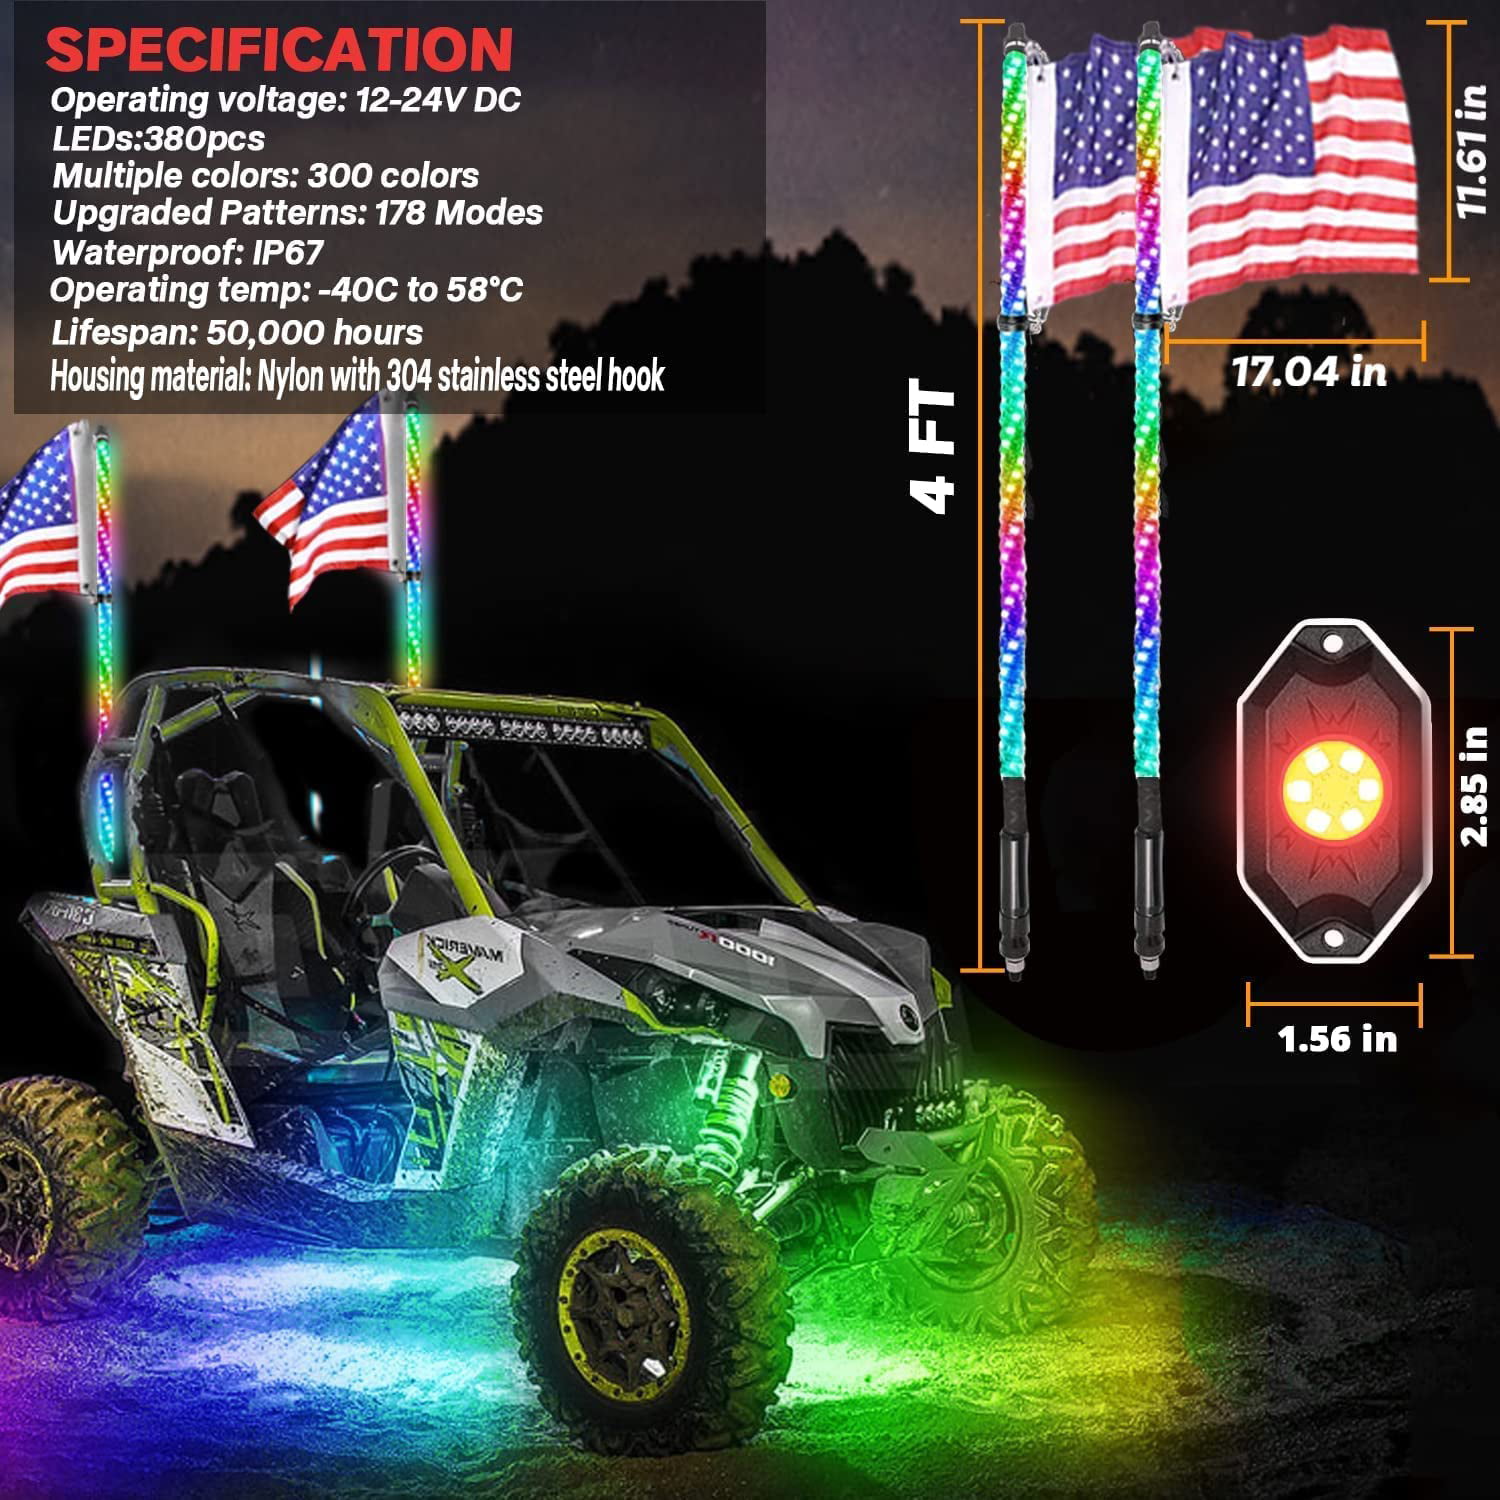 OHMU 2Pcs 4FT LED Whip Lights and 3rd-Gen Rock Lights Package with Bluetooth and Remote Control 360° Spiral Chase RGB Neon Offroad Warning Lighted Antenna Whips and Rocks 